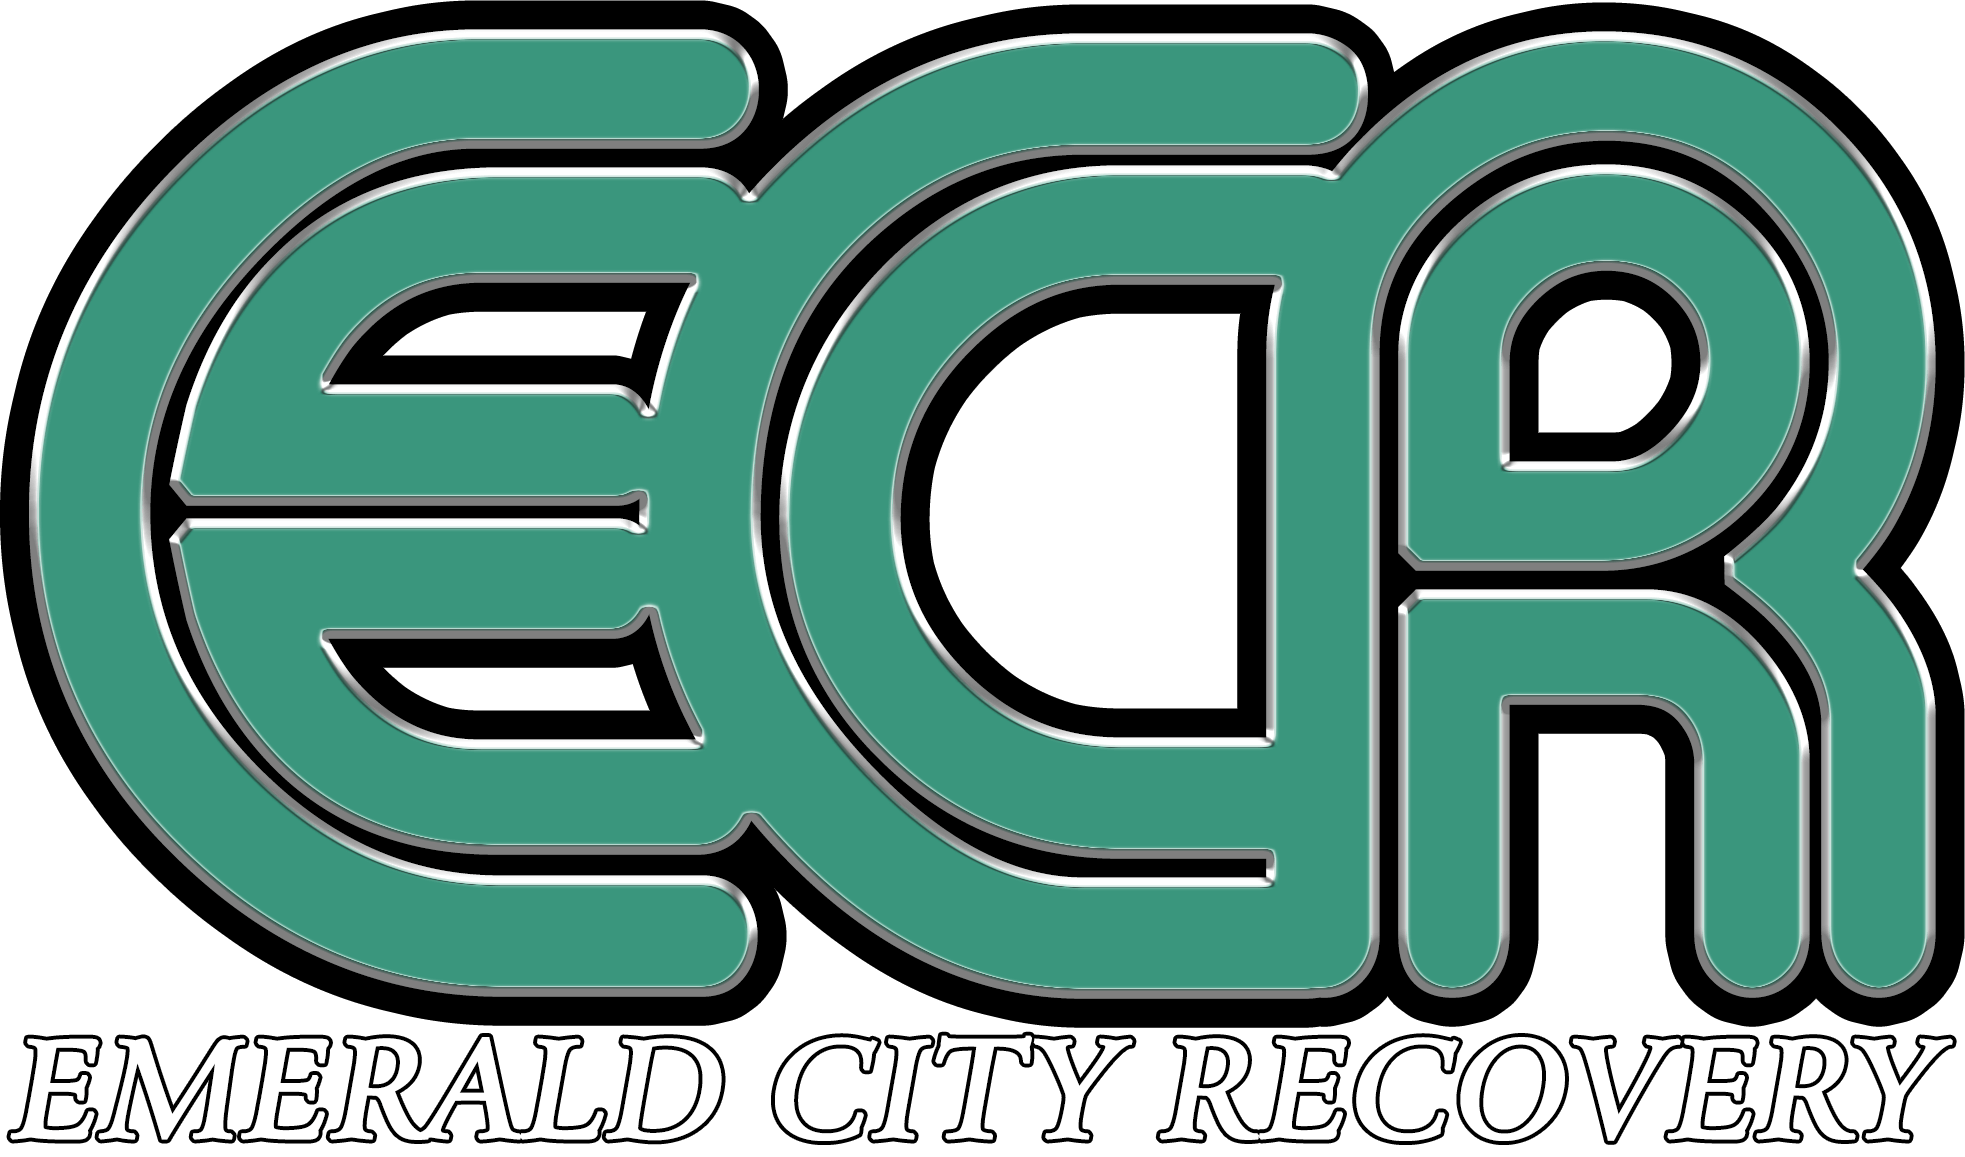 Emerald City Recovery provides HD condition report services in Washington state!